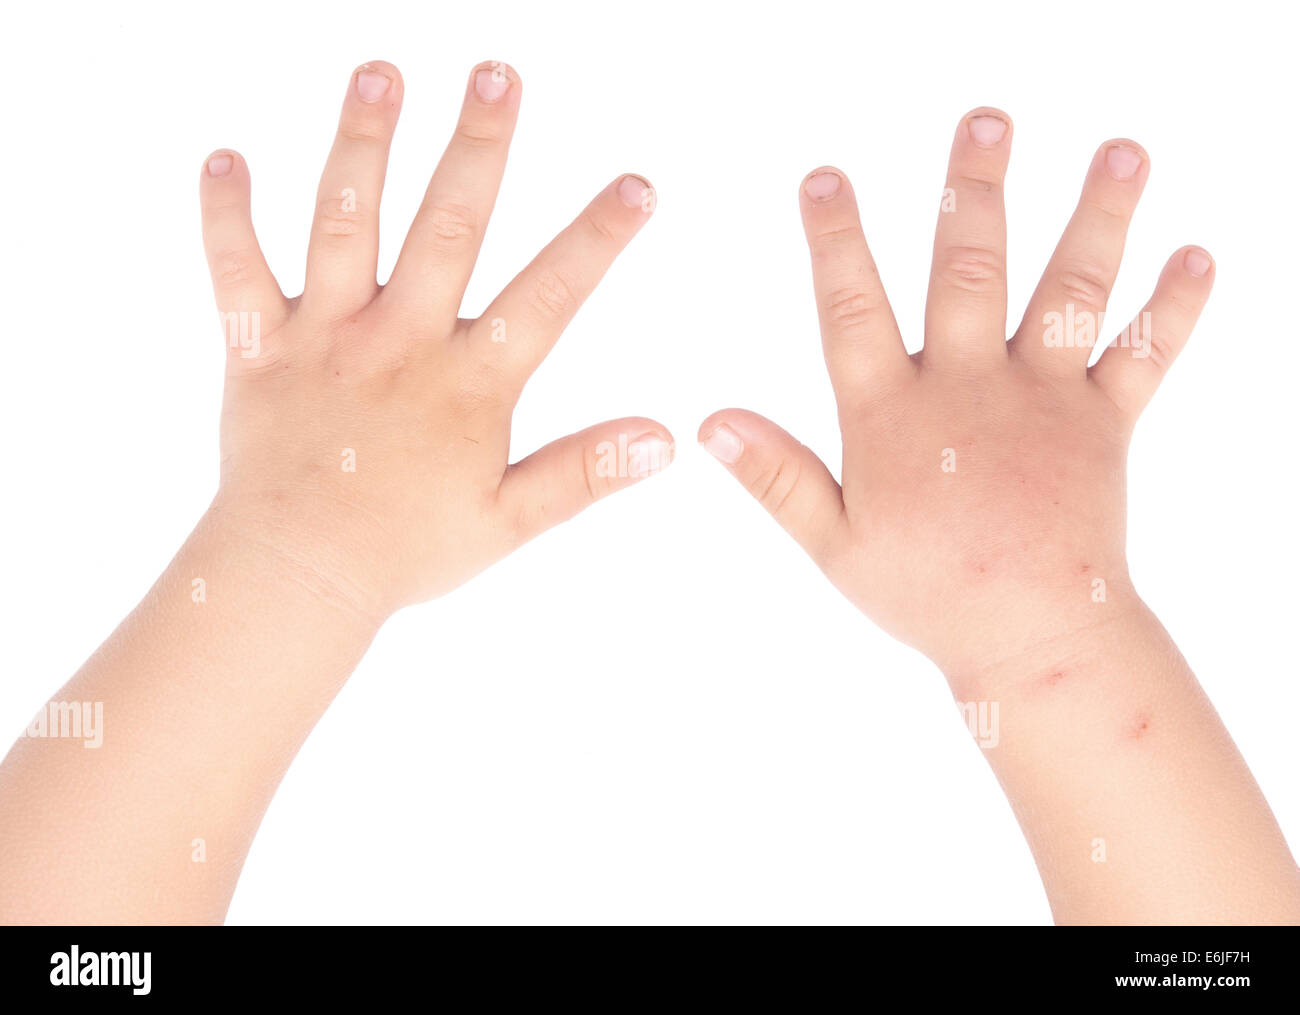 swollen and healthy baby hands isolated on white background Stock Photo